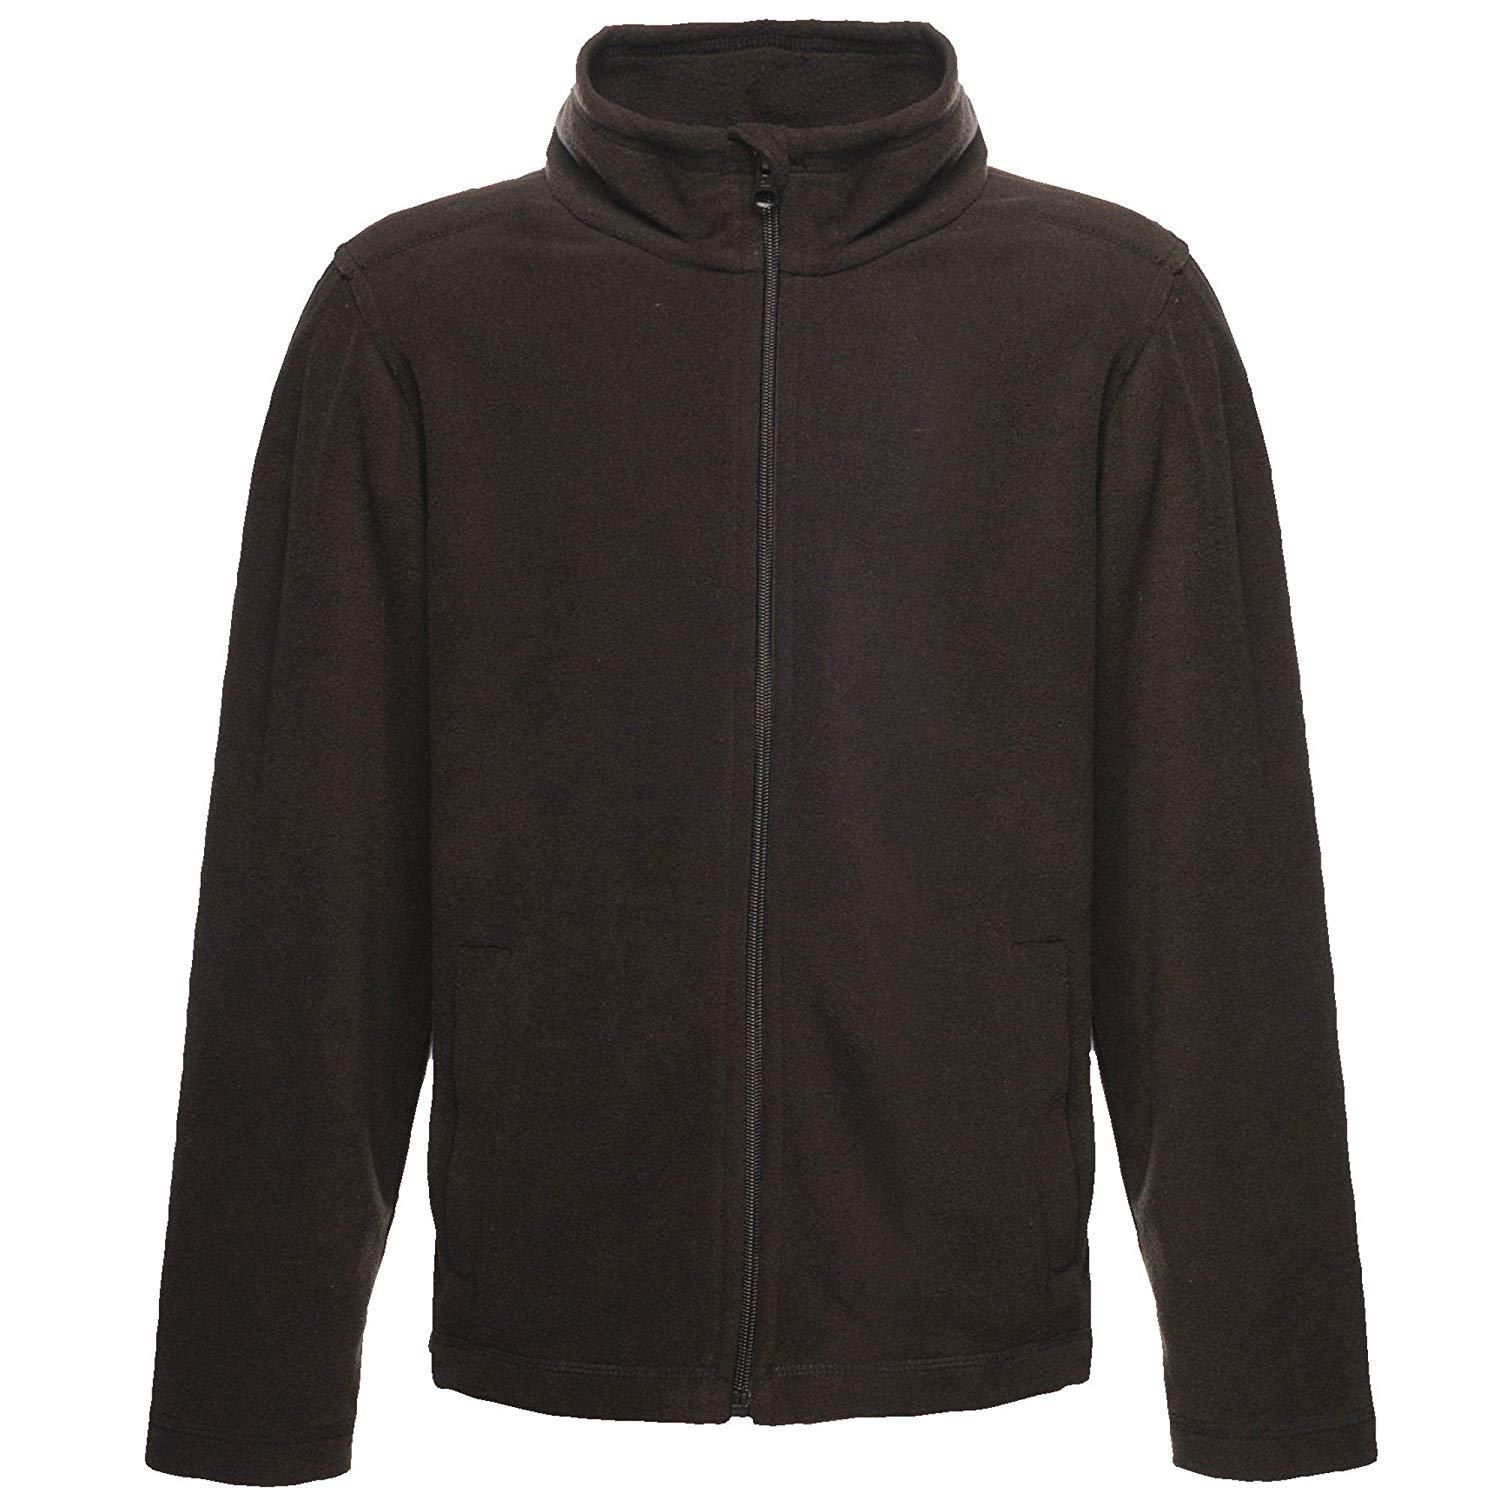 100% polyester. 170 series microfleece. Layer lite fabric technology. Quick drying. Easy care. Good wicking performance. Full zip.